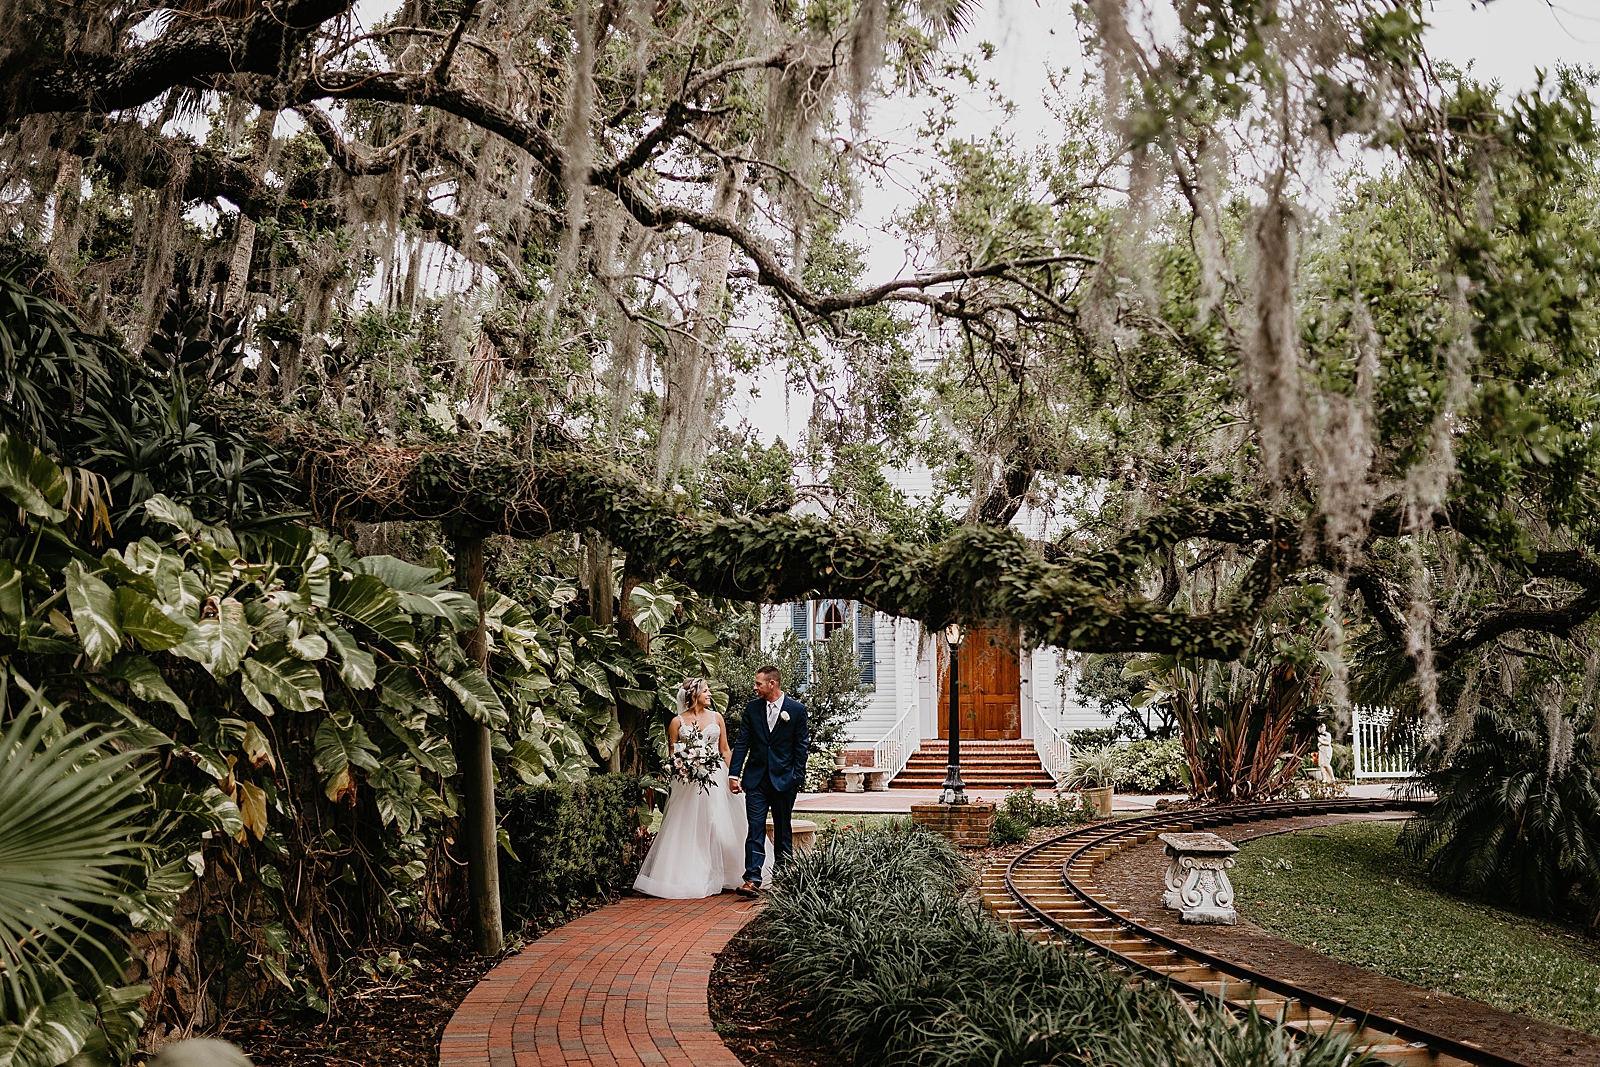 Couple holding hands and walking on brick path under large tree branch with Spanish moss